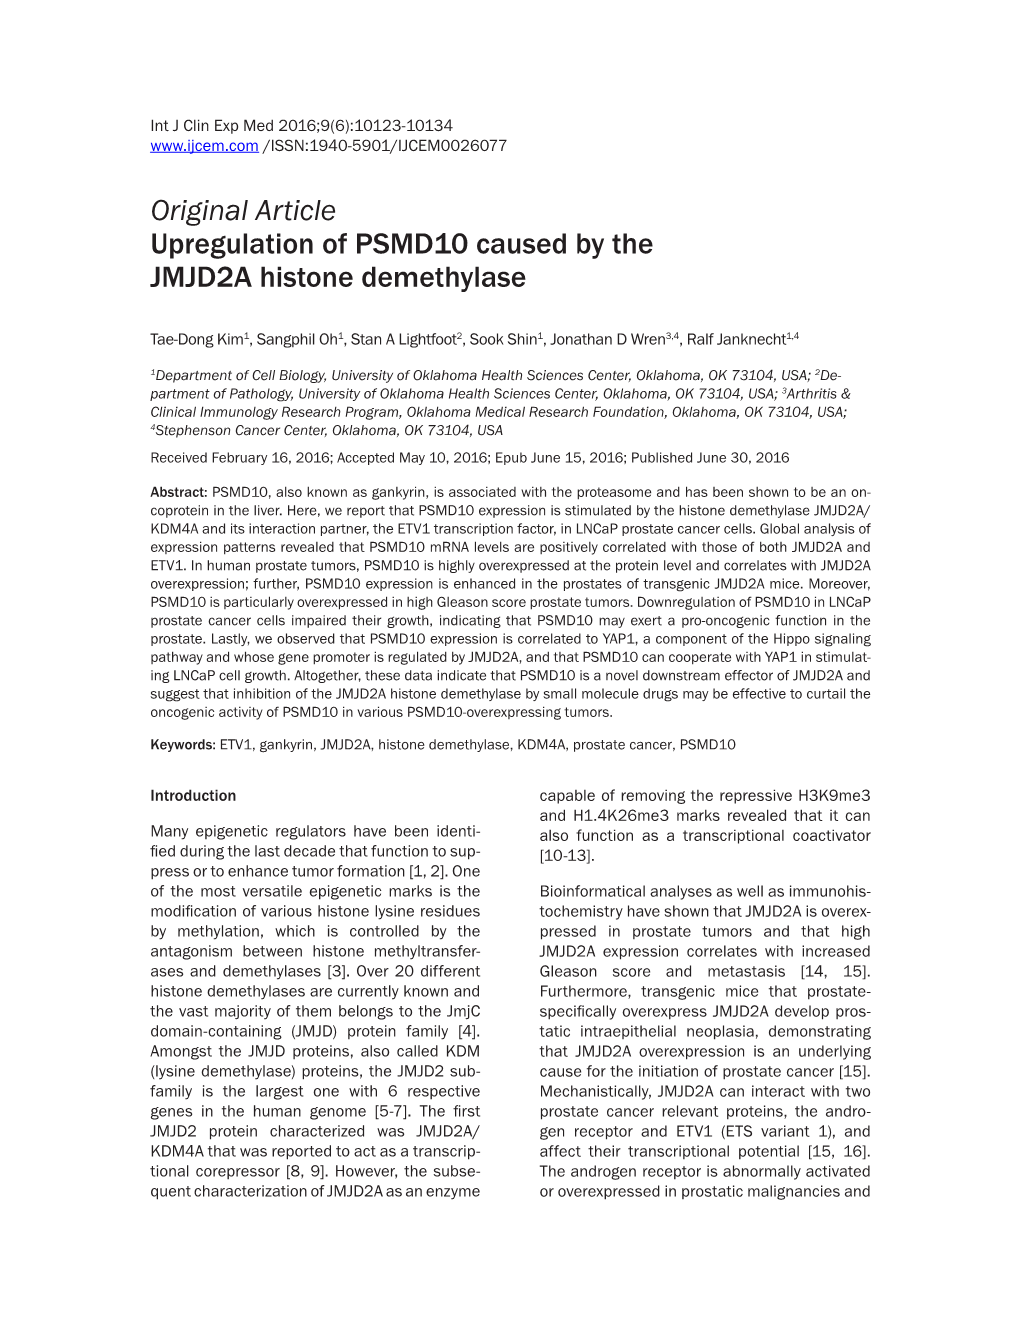 Original Article Upregulation of PSMD10 Caused by the JMJD2A Histone Demethylase